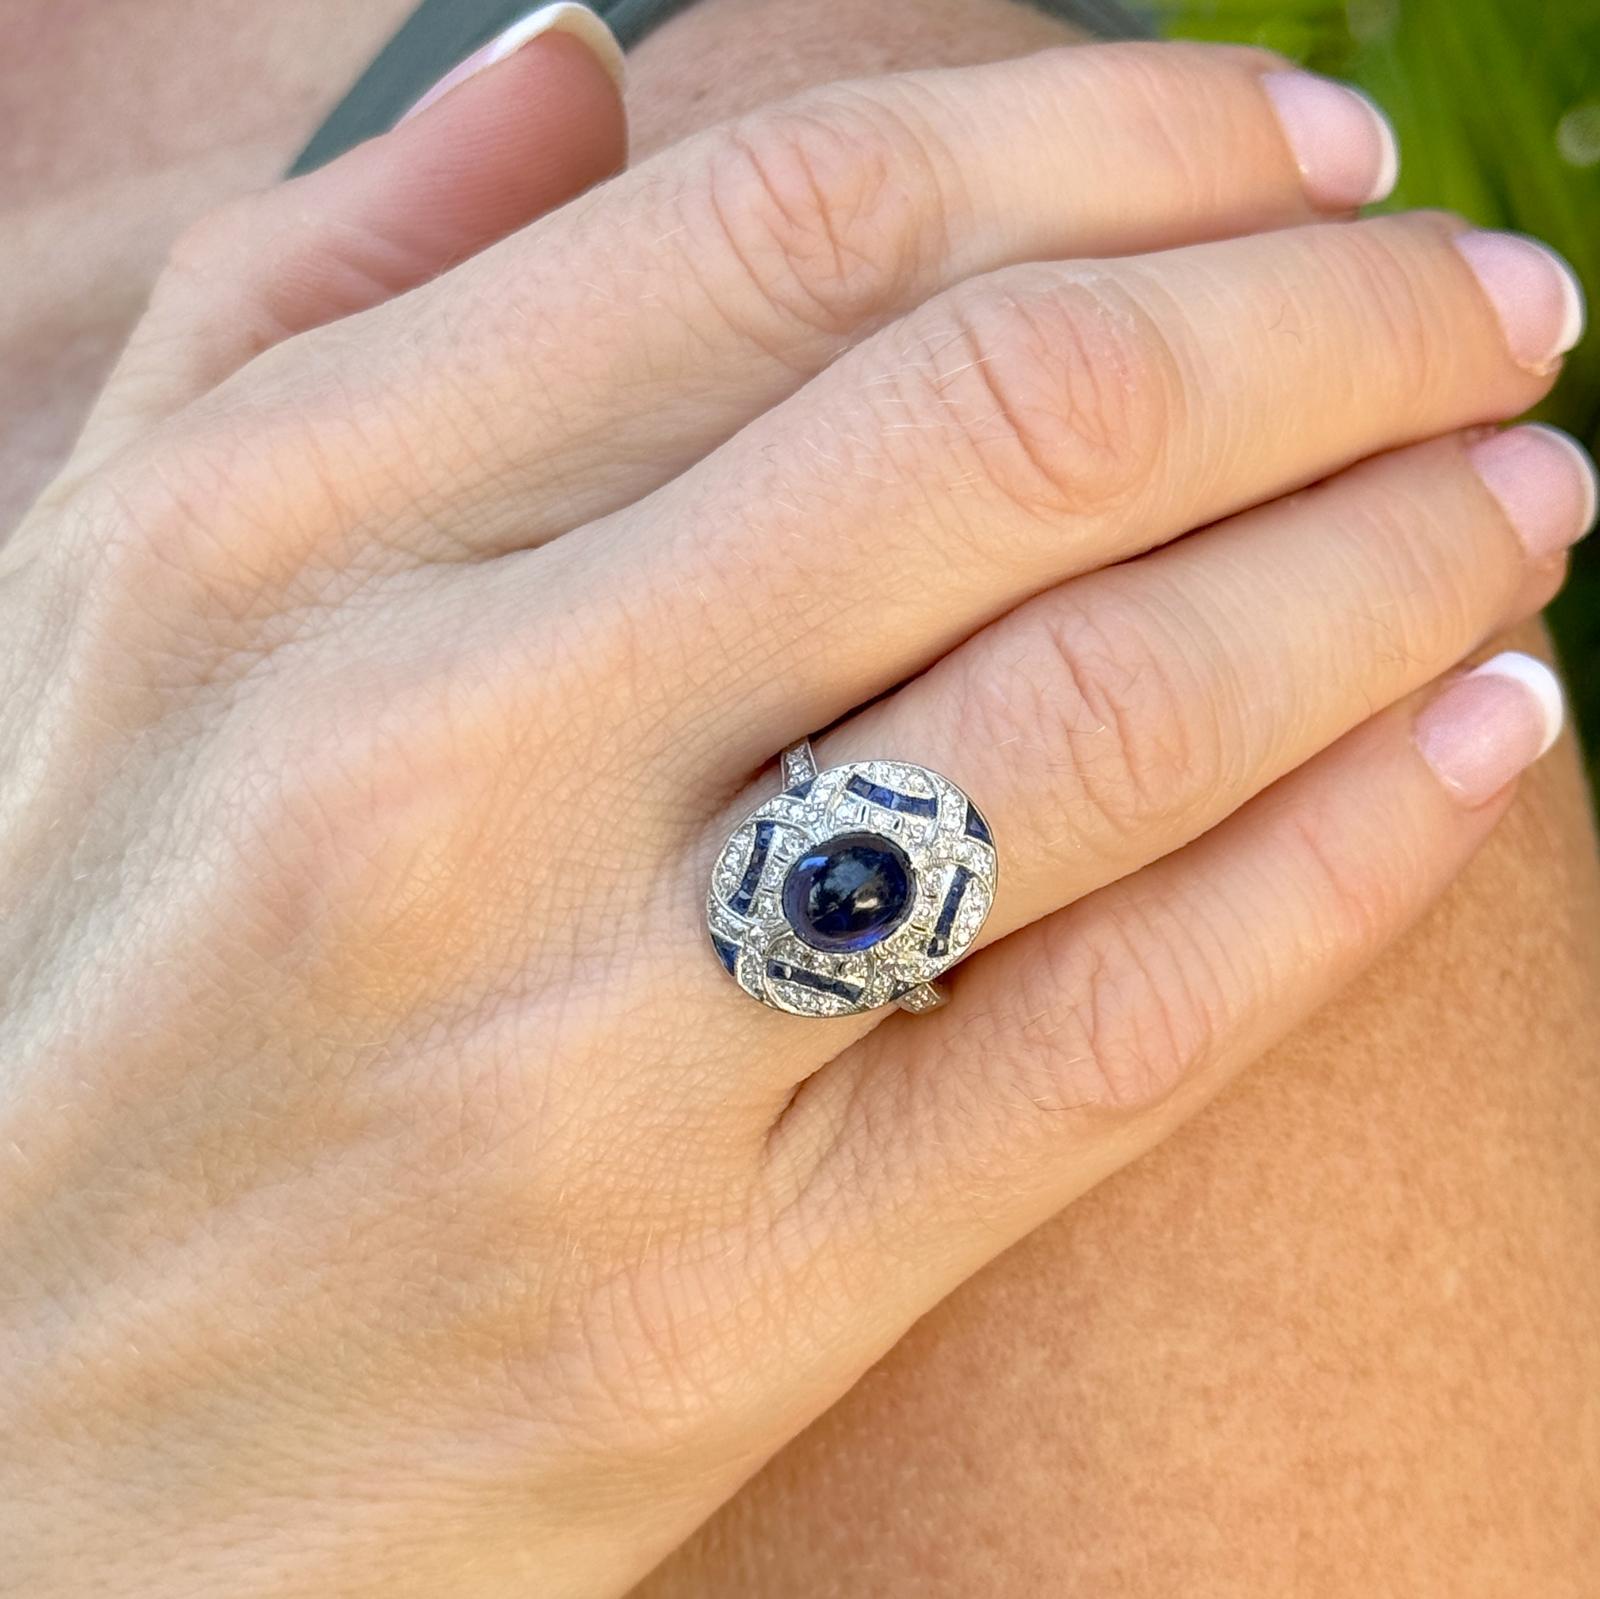 This exquisite cocktail ring epitomizes the elegance of the Art Deco era with its capitavting design. The ring features a stunning approximate 2.00 carat cabochon sapphire as its centerpiece. Encircling the sapphire are 50 single cut sparling